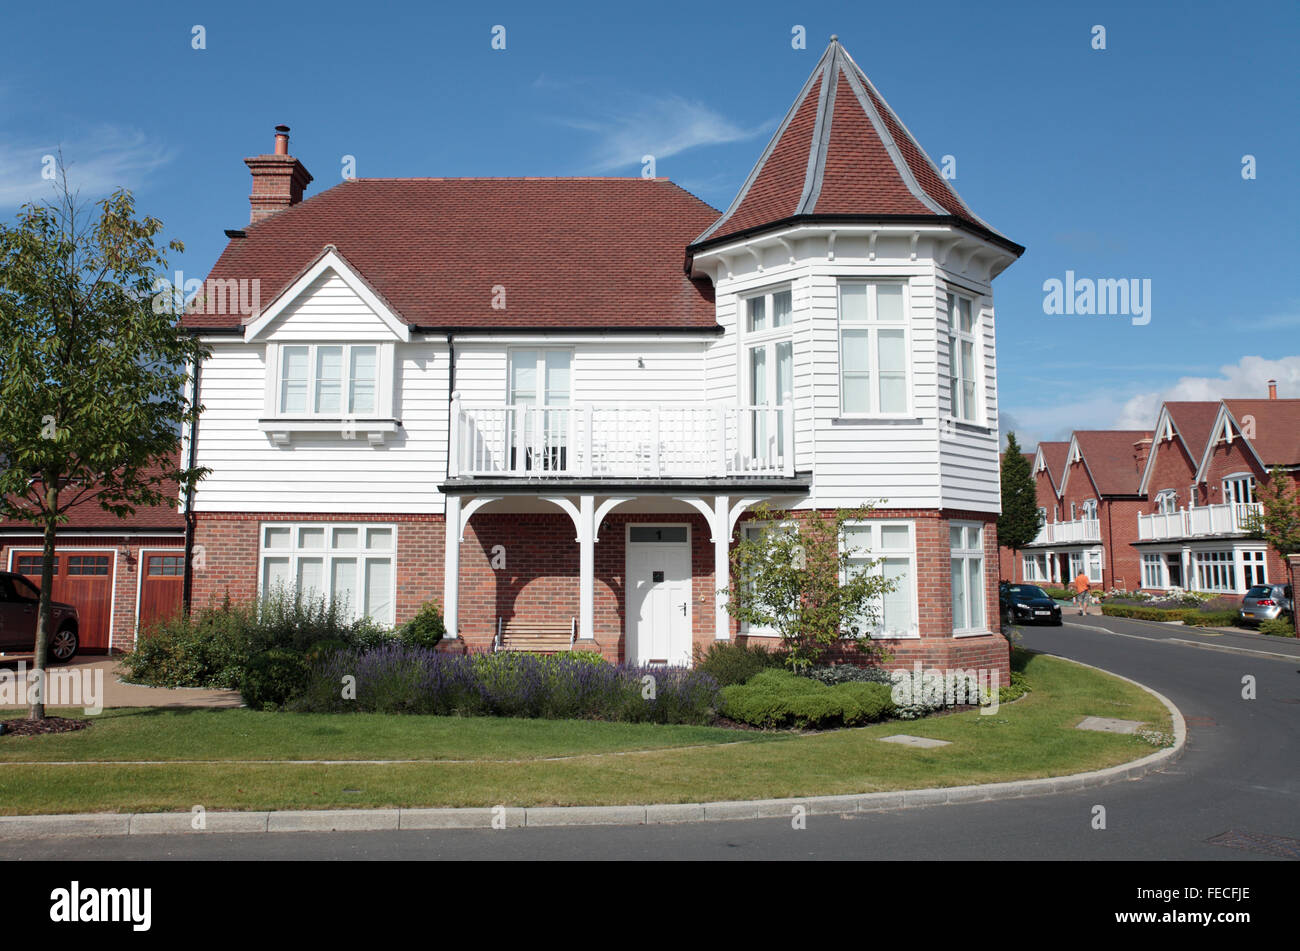 New Homes in Horsham, West Sussex, England Stock Photo